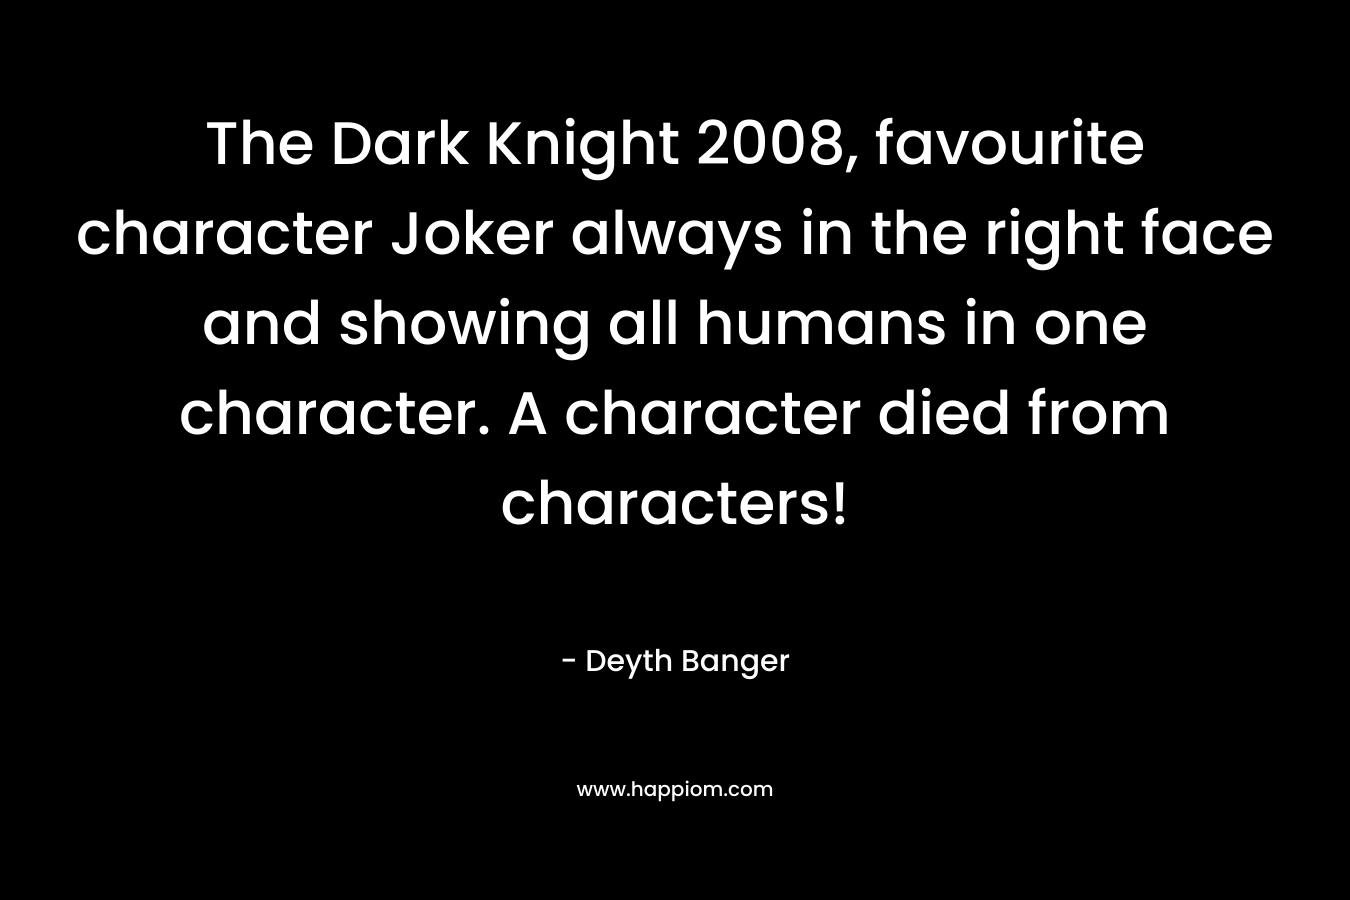 The Dark Knight 2008, favourite character Joker always in the right face and showing all humans in one character. A character died from characters!